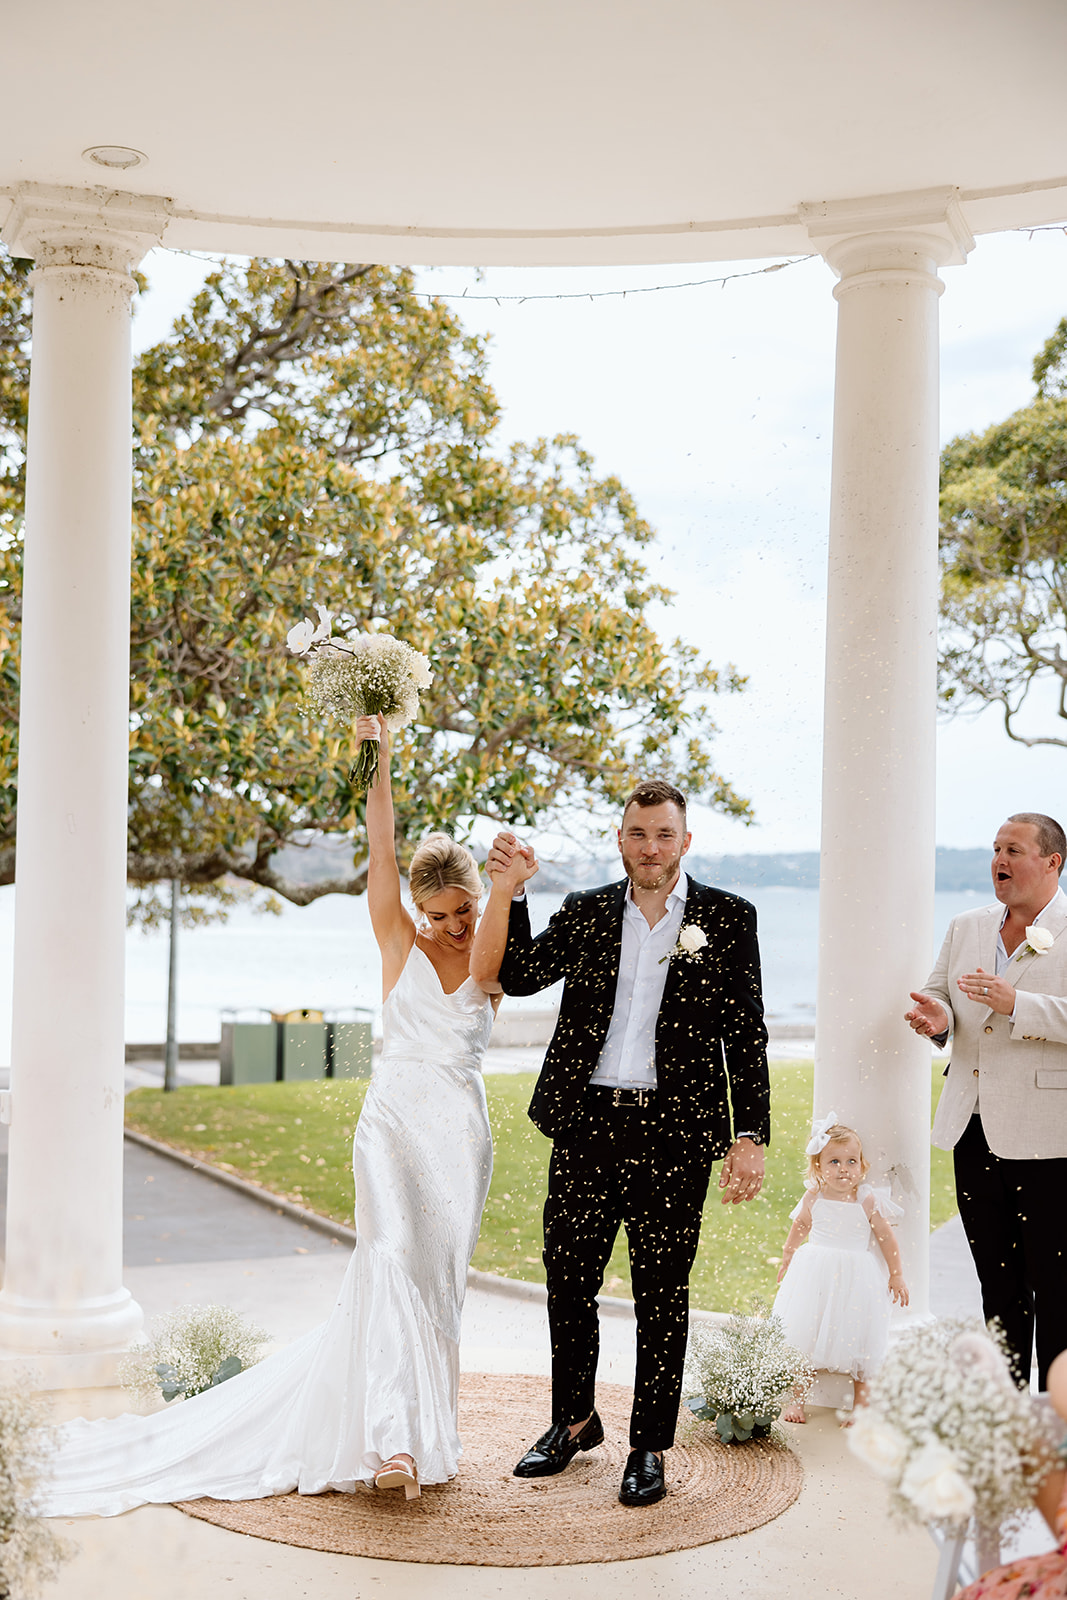 Bride and groom recessional at the wedding in The Fernery Mosman